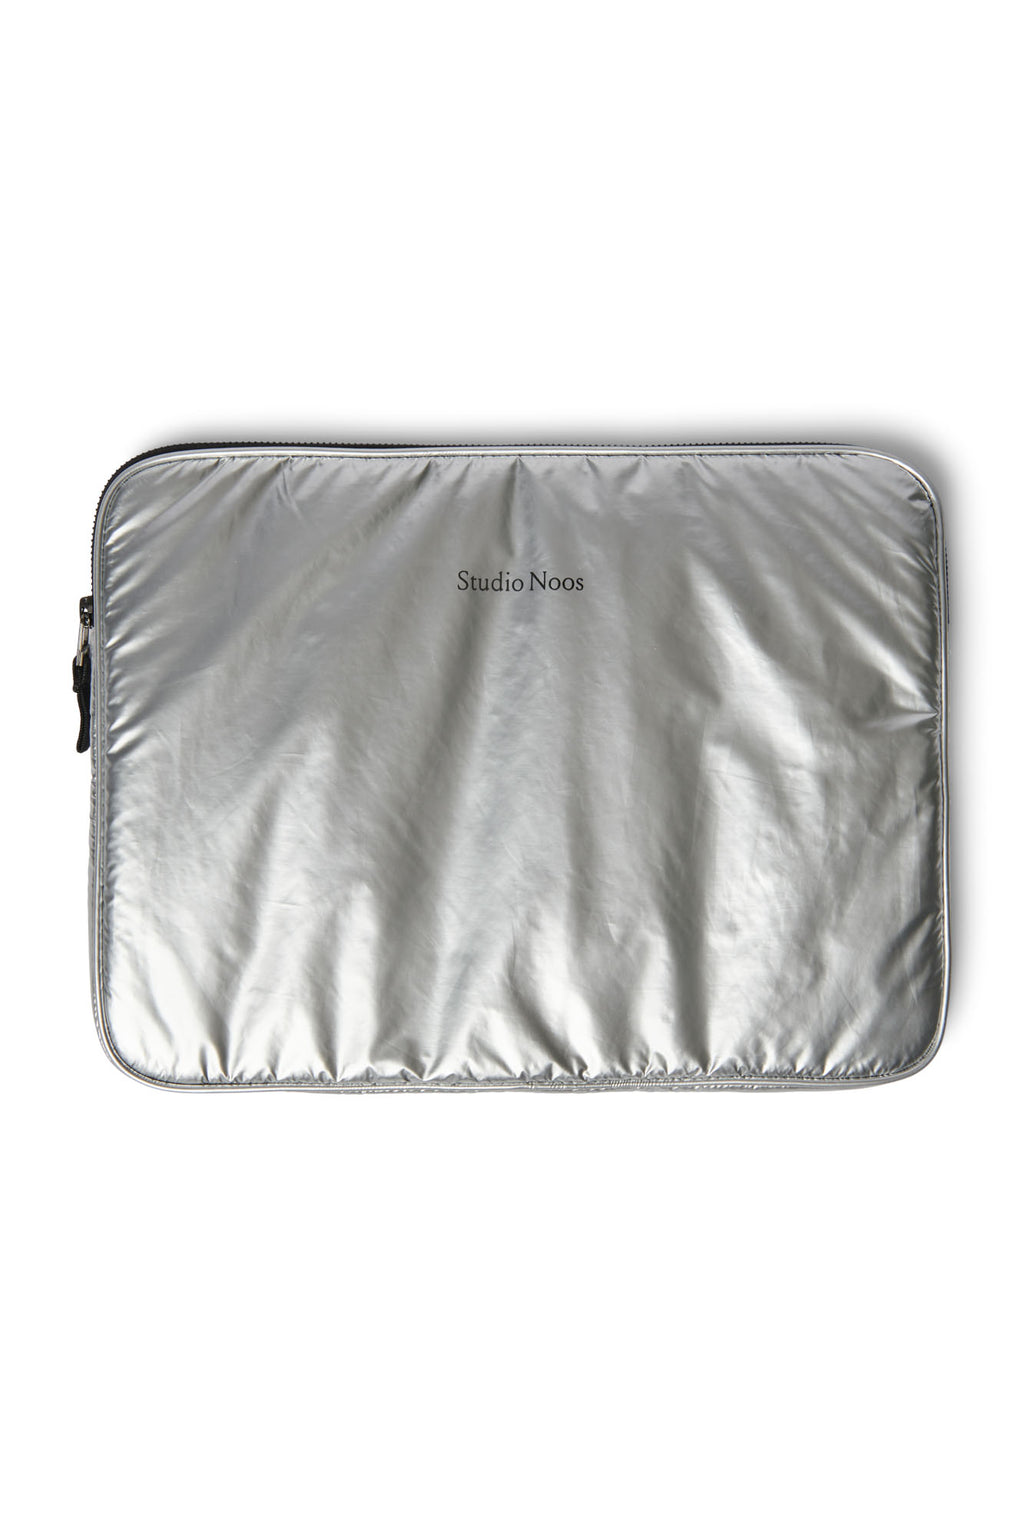 Silver Puffy Laptop Sleeve | 13inch